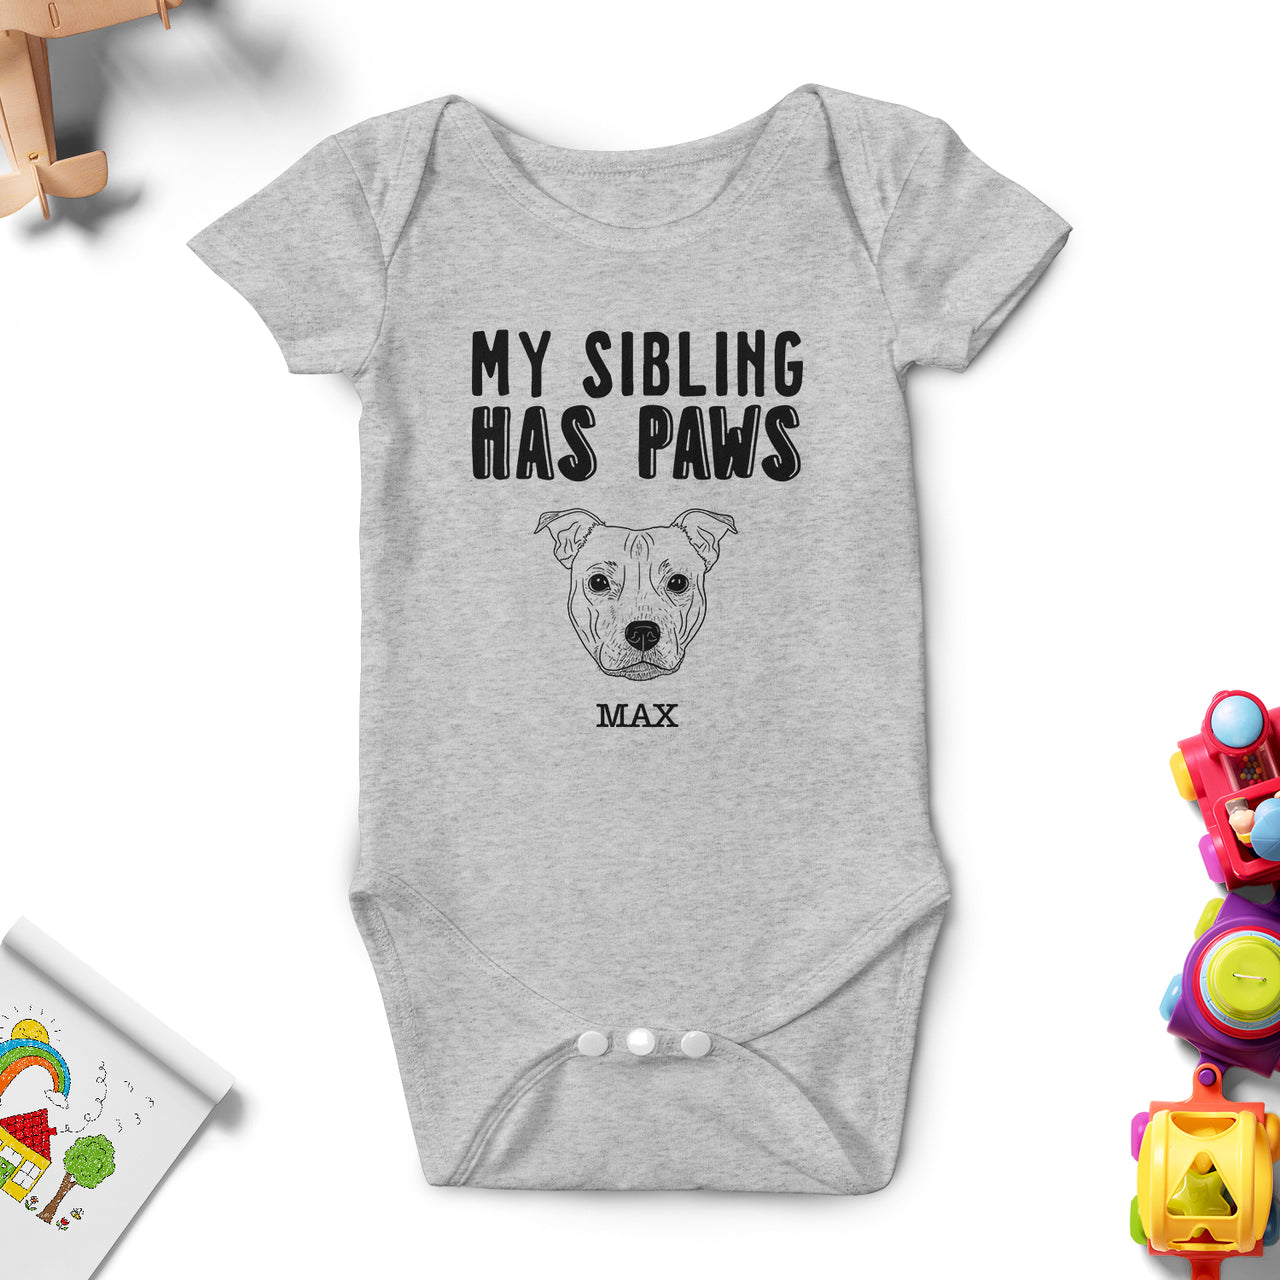 This baby is protected by dogs - Personalized Baby Onesie Merchiz